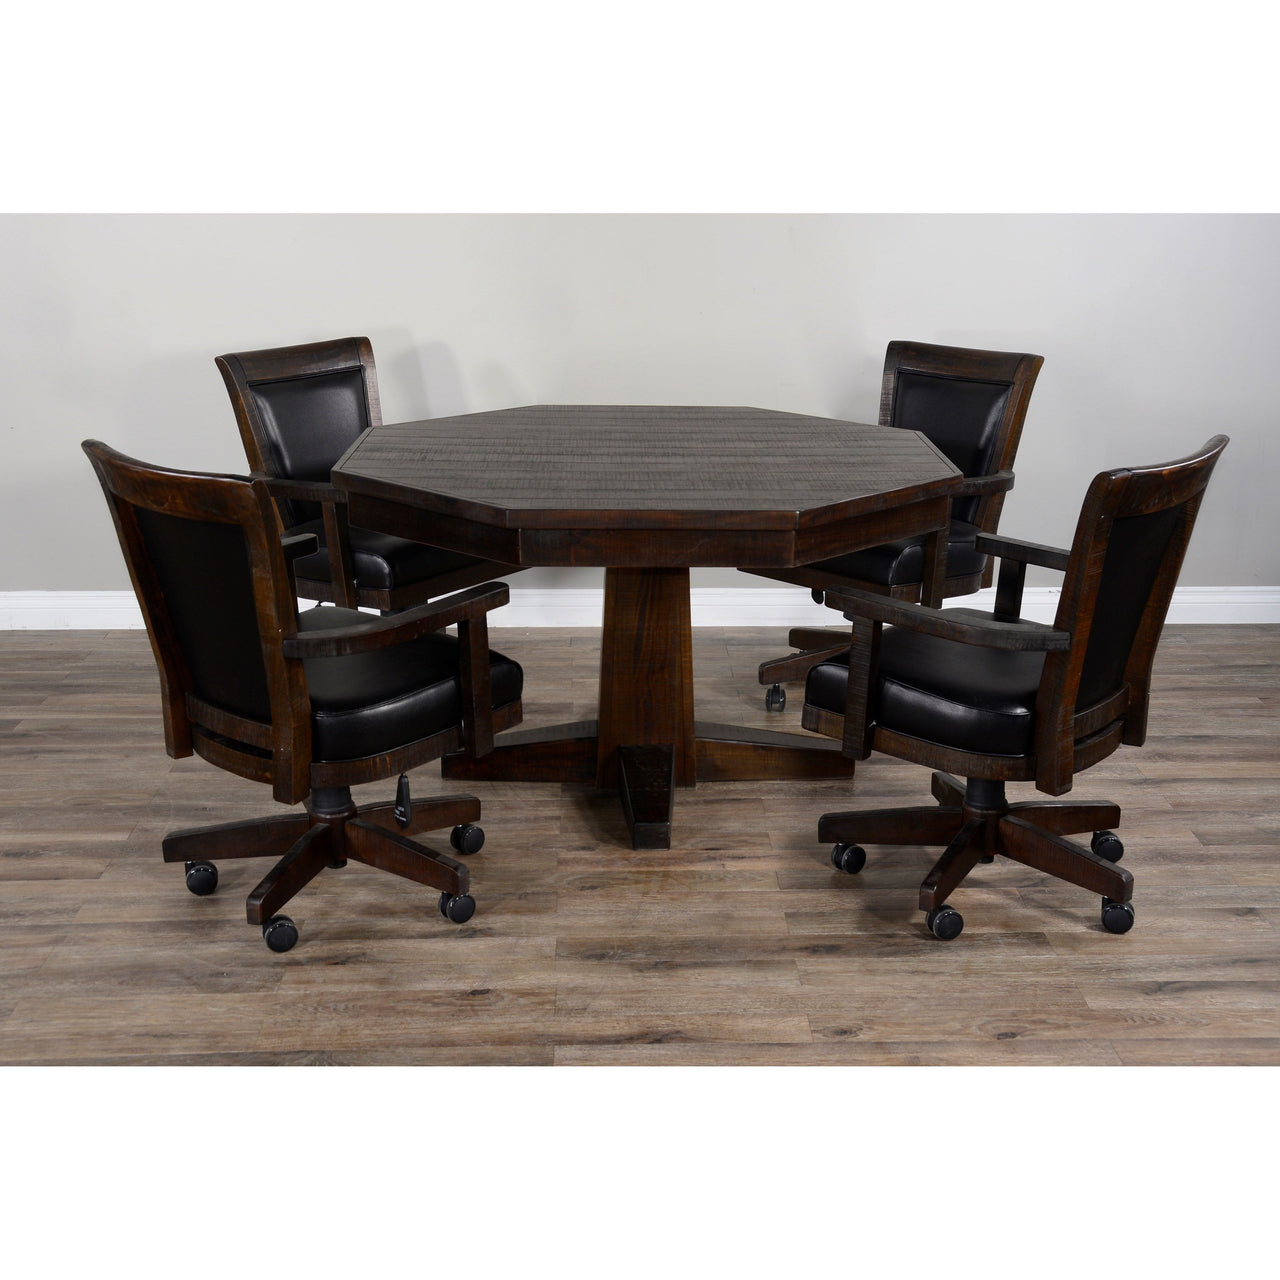 Octagon Poker Dining Table with Chairs, Convertible, 8-person, 53'', Dark Tobacco Leaf by Sunny Designs